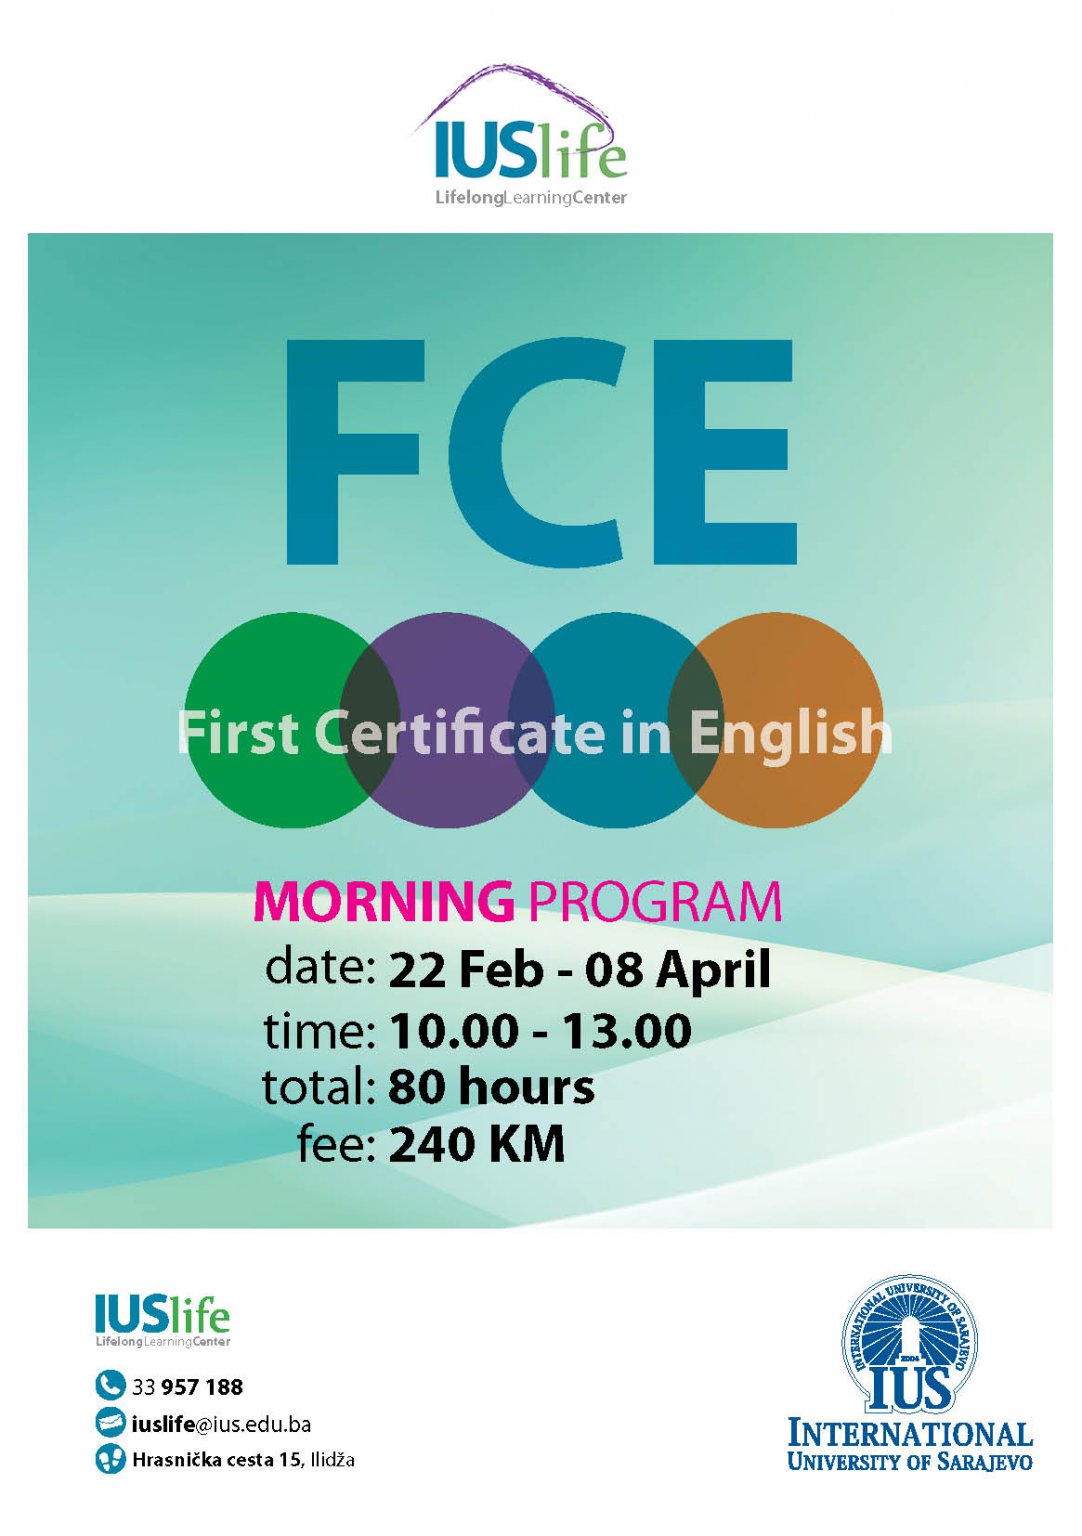  Morning Program "First Certificate in English" 